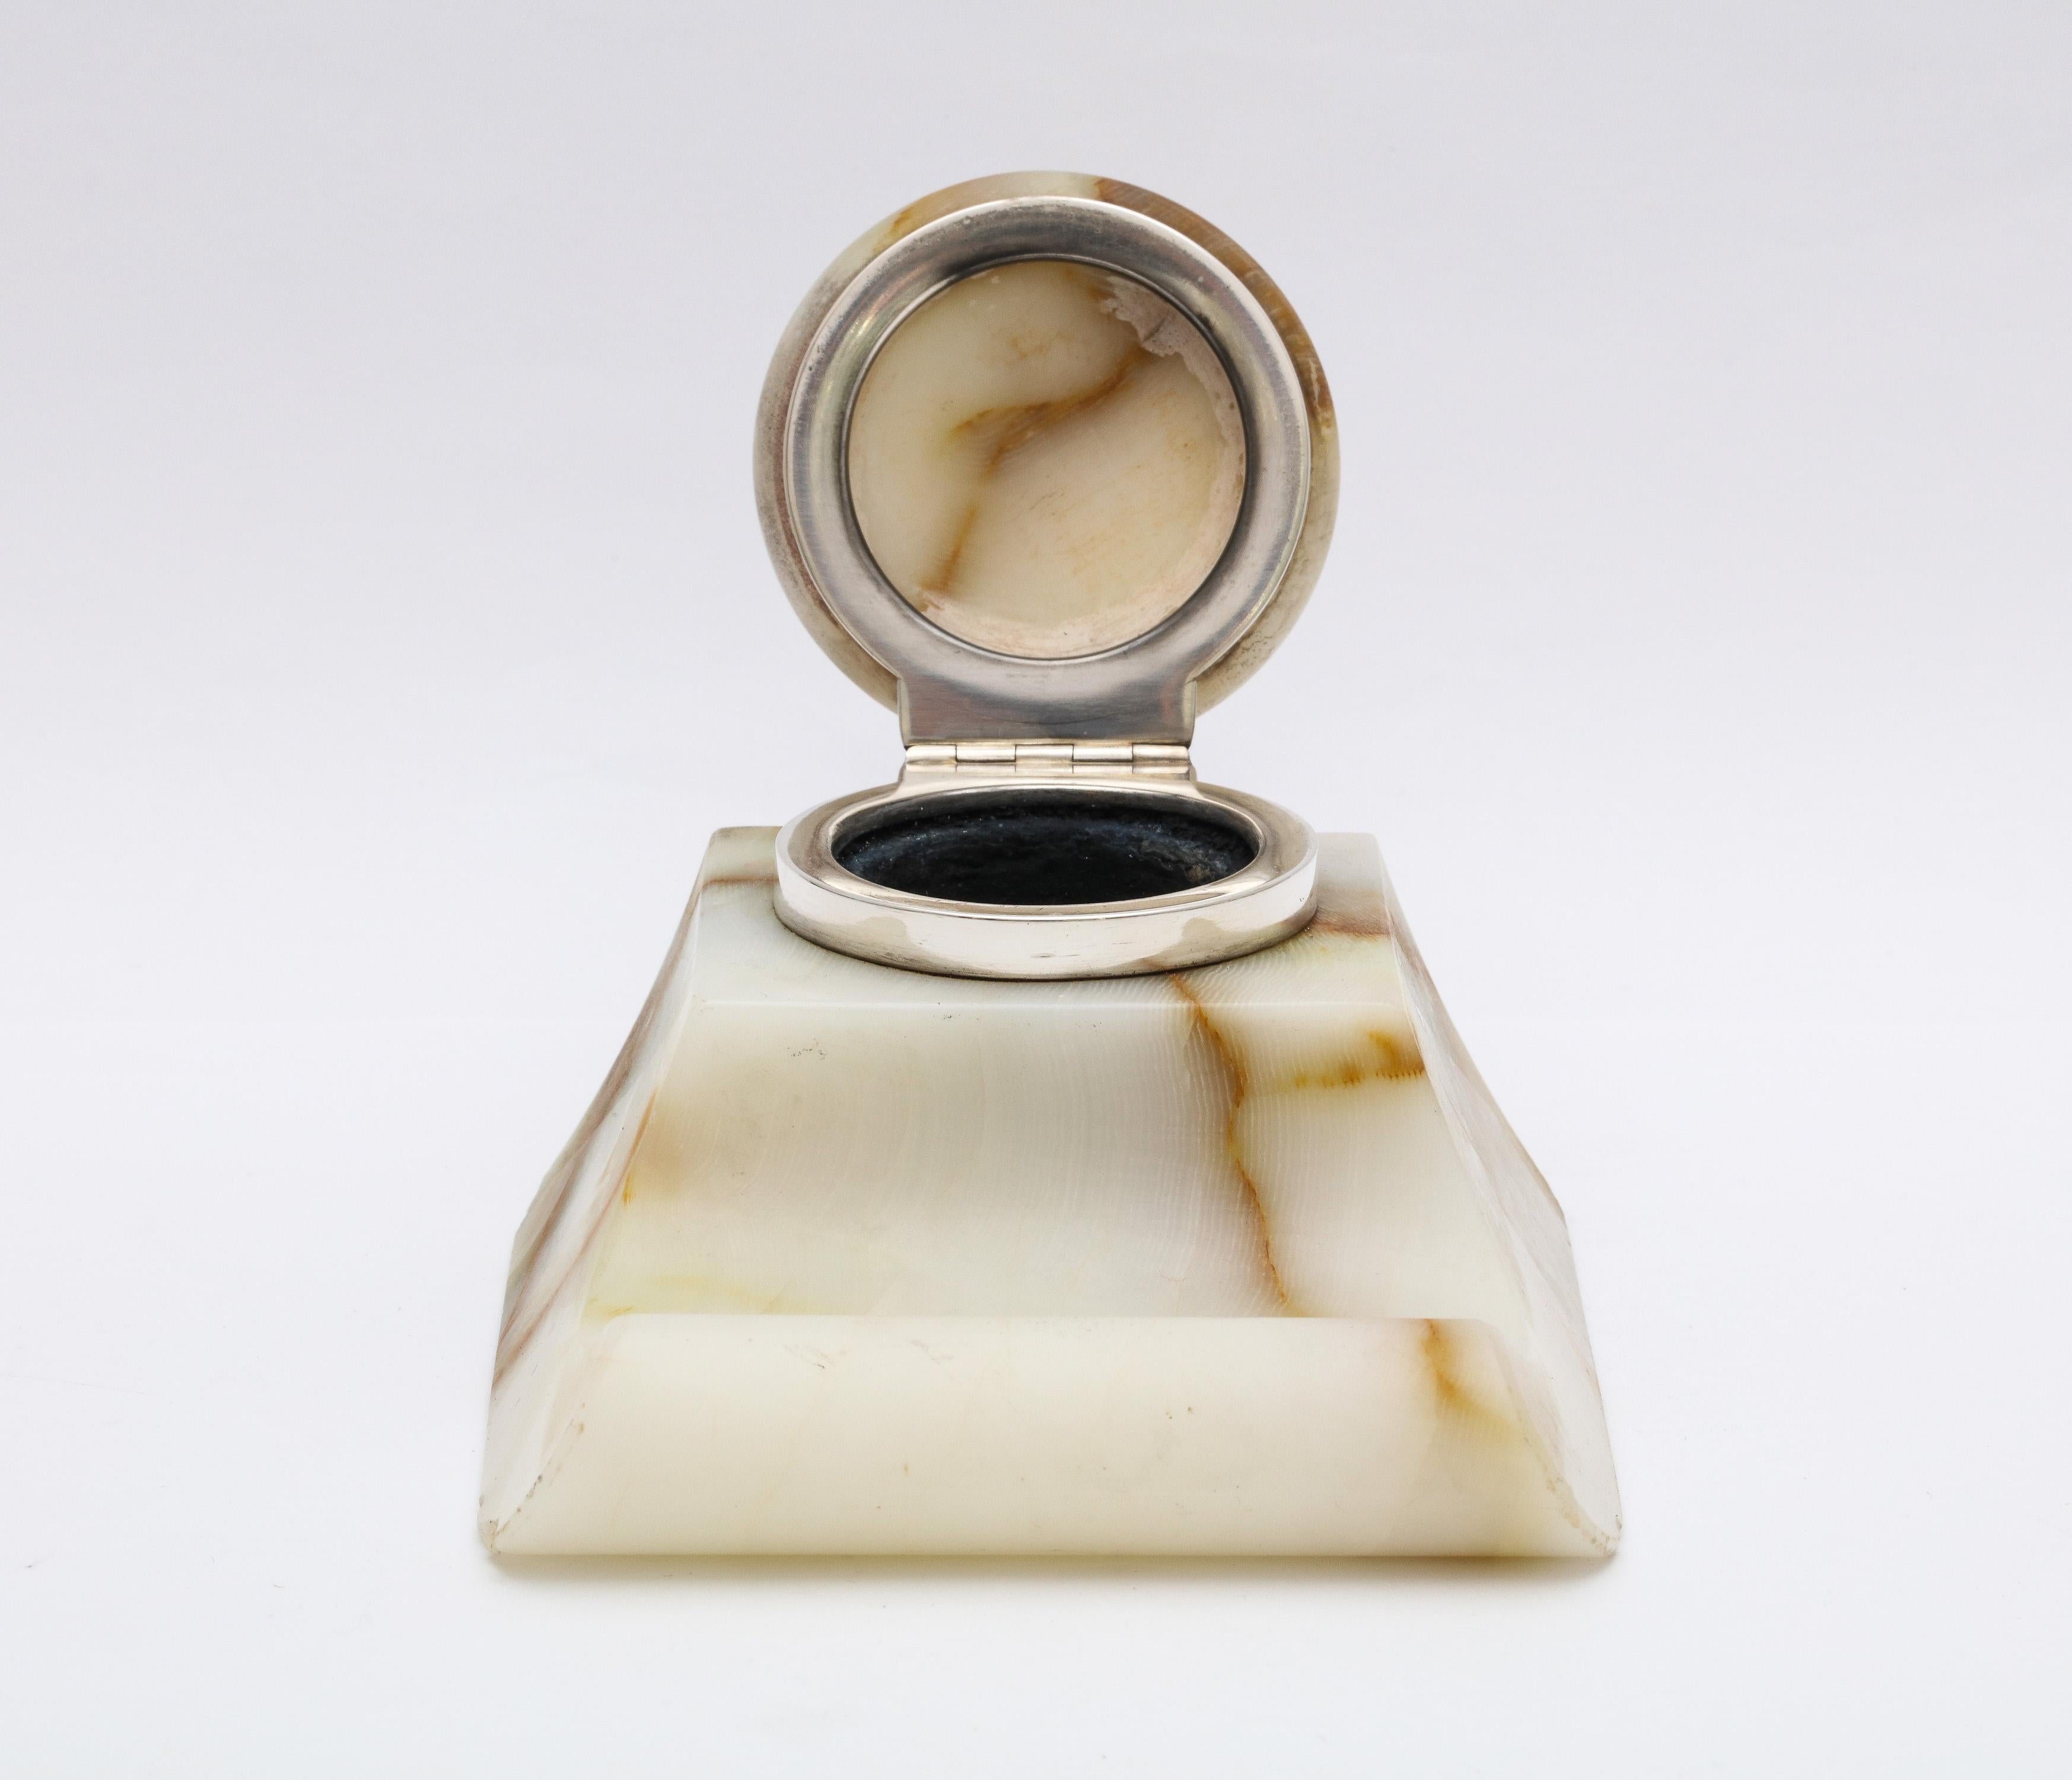 Edwardian Sterling Silver-Mounted Onyx Inkwell For Sale 3